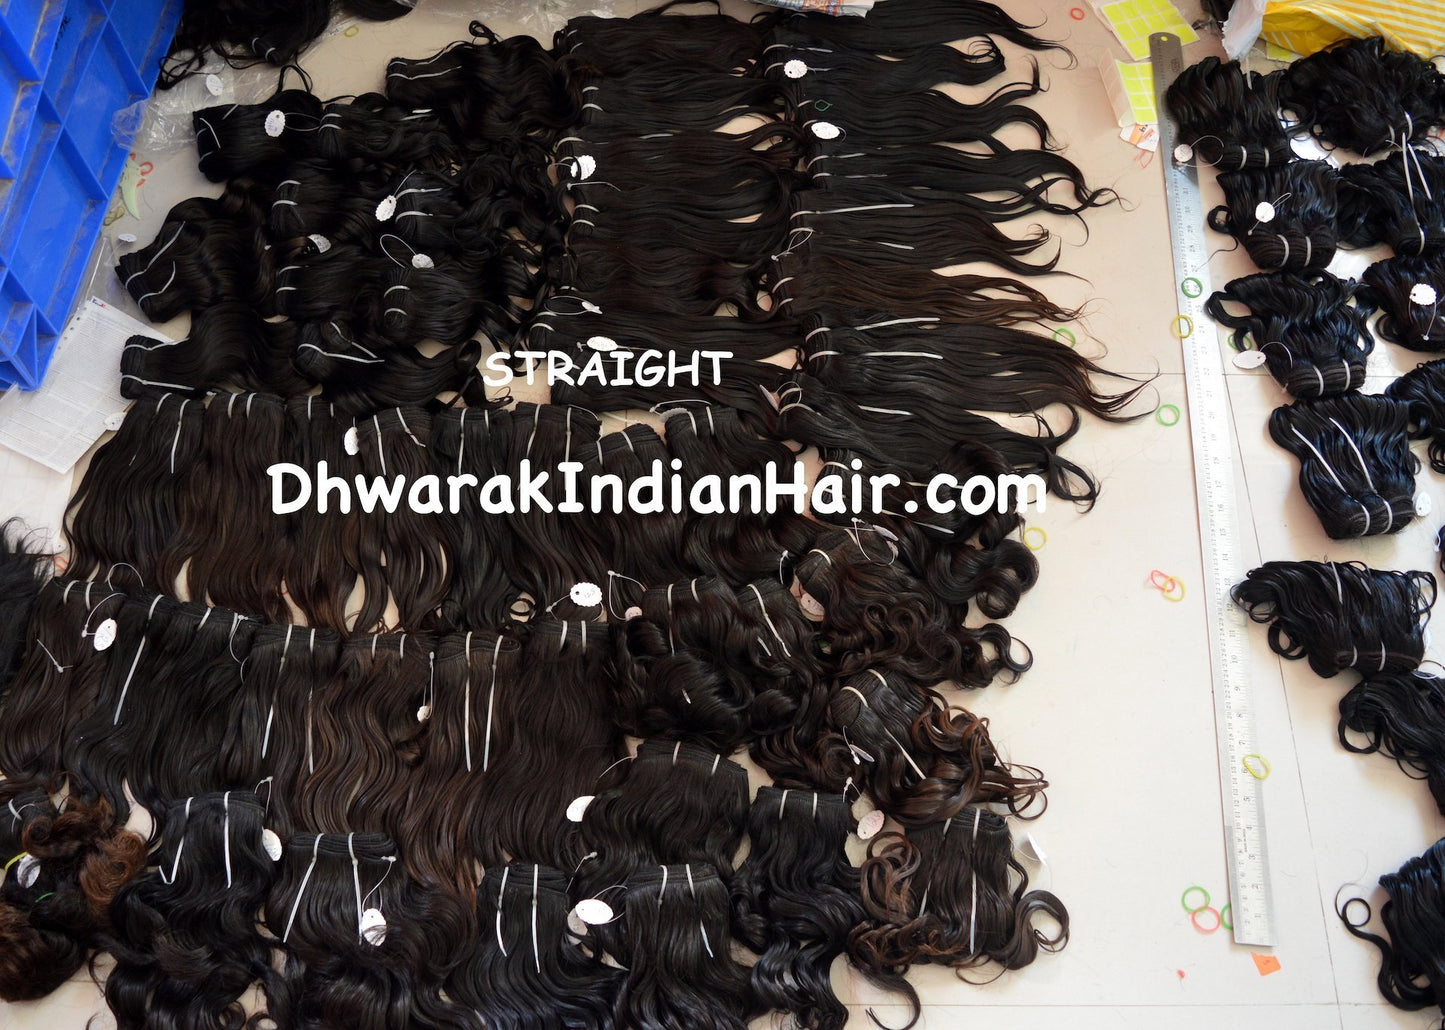 Raw Indian hair weaves wholesale vendor in india